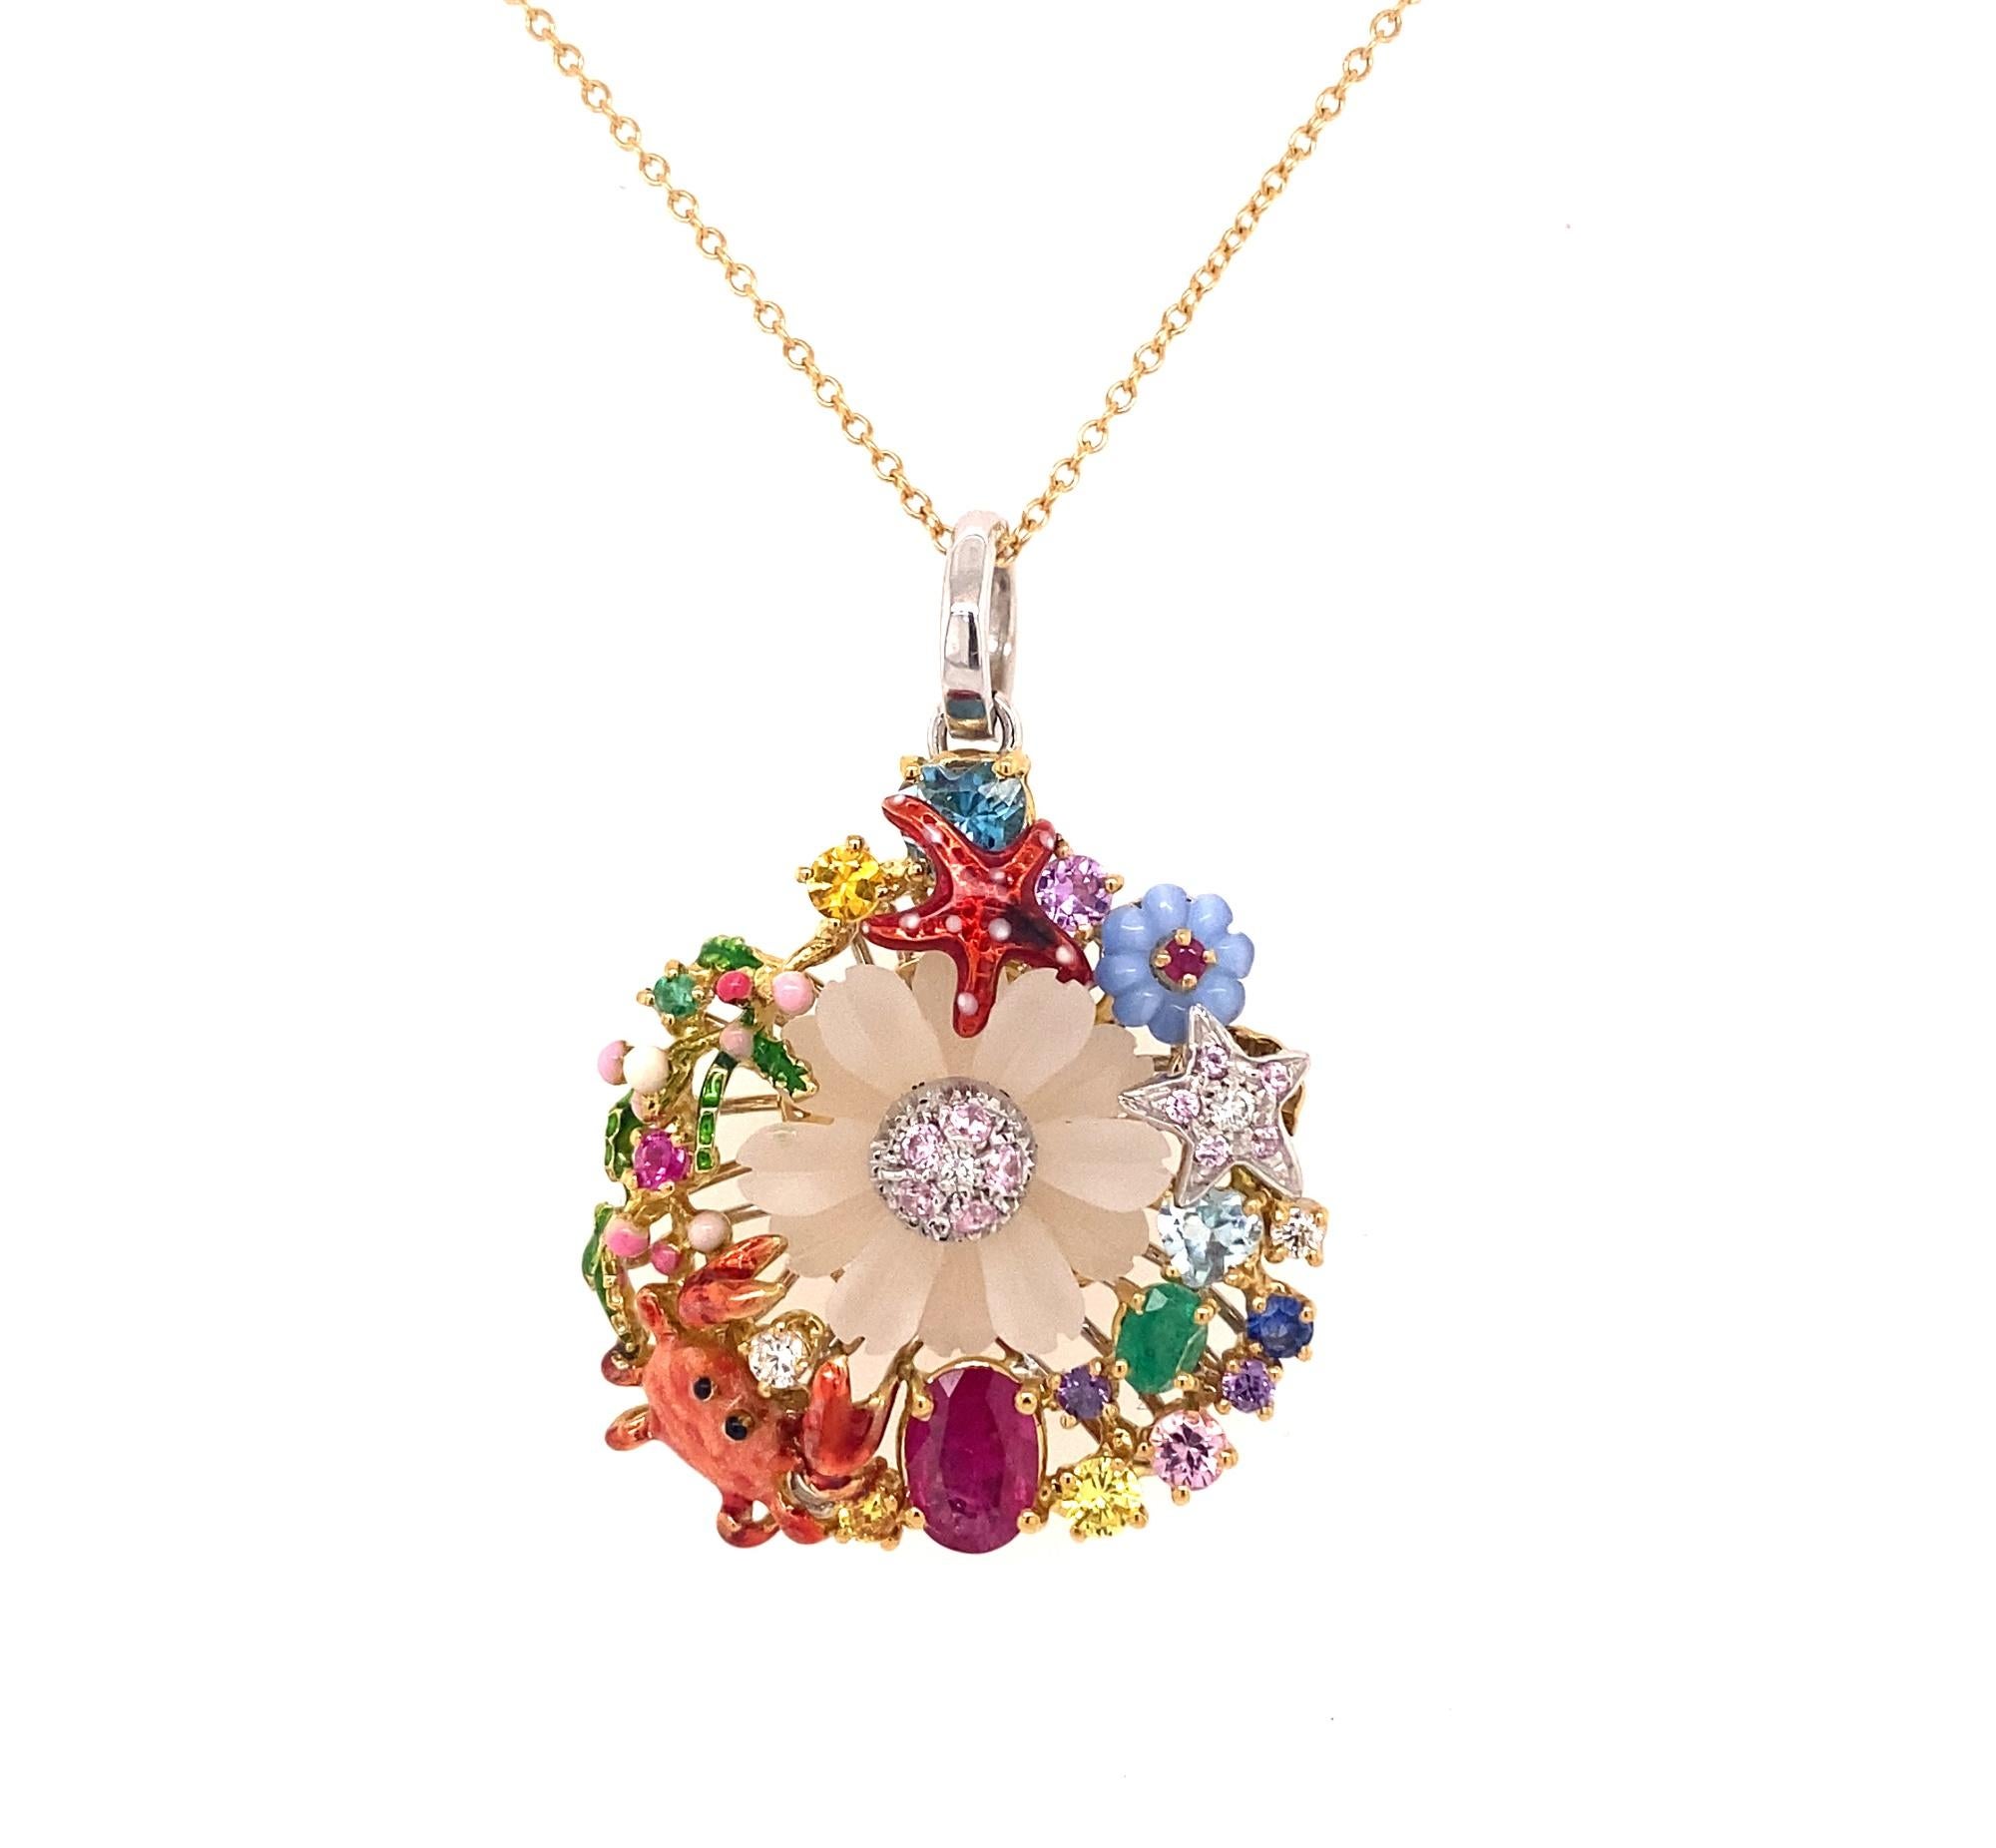 This is a beautiful Italian designer pendant by Santagostino.  The pendant is from the Caribbean reef collection.  The pendant has multi color gemstones with enamel crabs and starfish.  The multicolor gemstones consist of white & yellow diamonds,